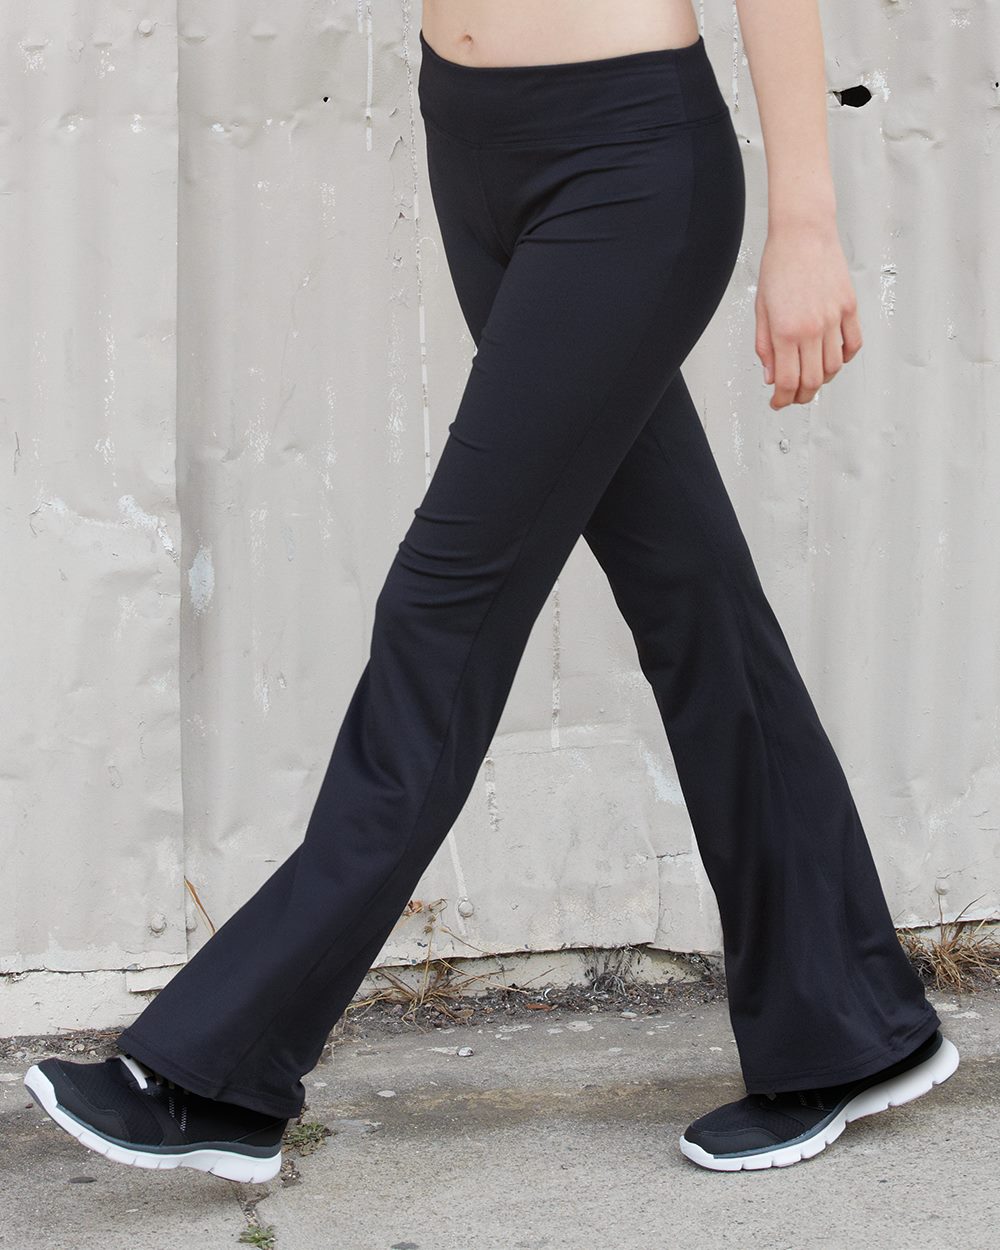 http://www.nyfifth.com/category/20160911/badger-4218t-womens-yoga-travel-pants-tall-sizes_AA-1327-4218T_NyFifth.jpg